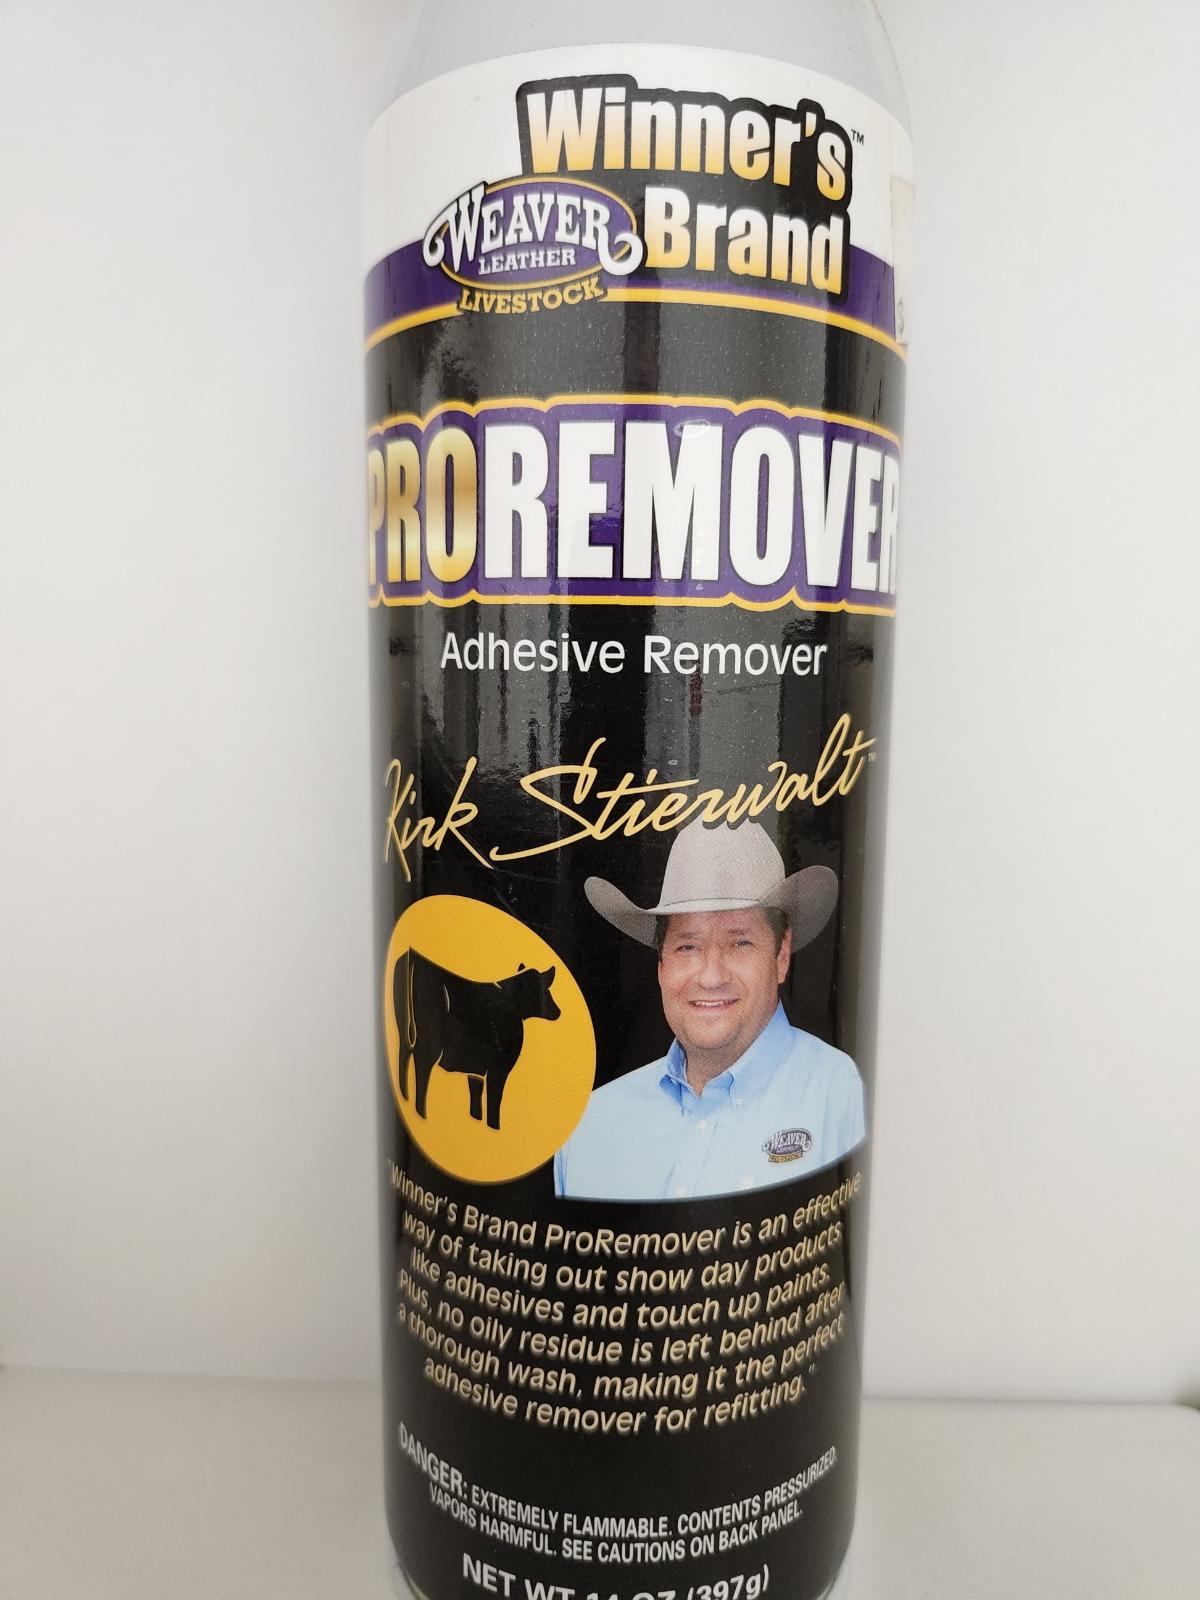 Pro Remover Adhesive Remover by Weaver Leather